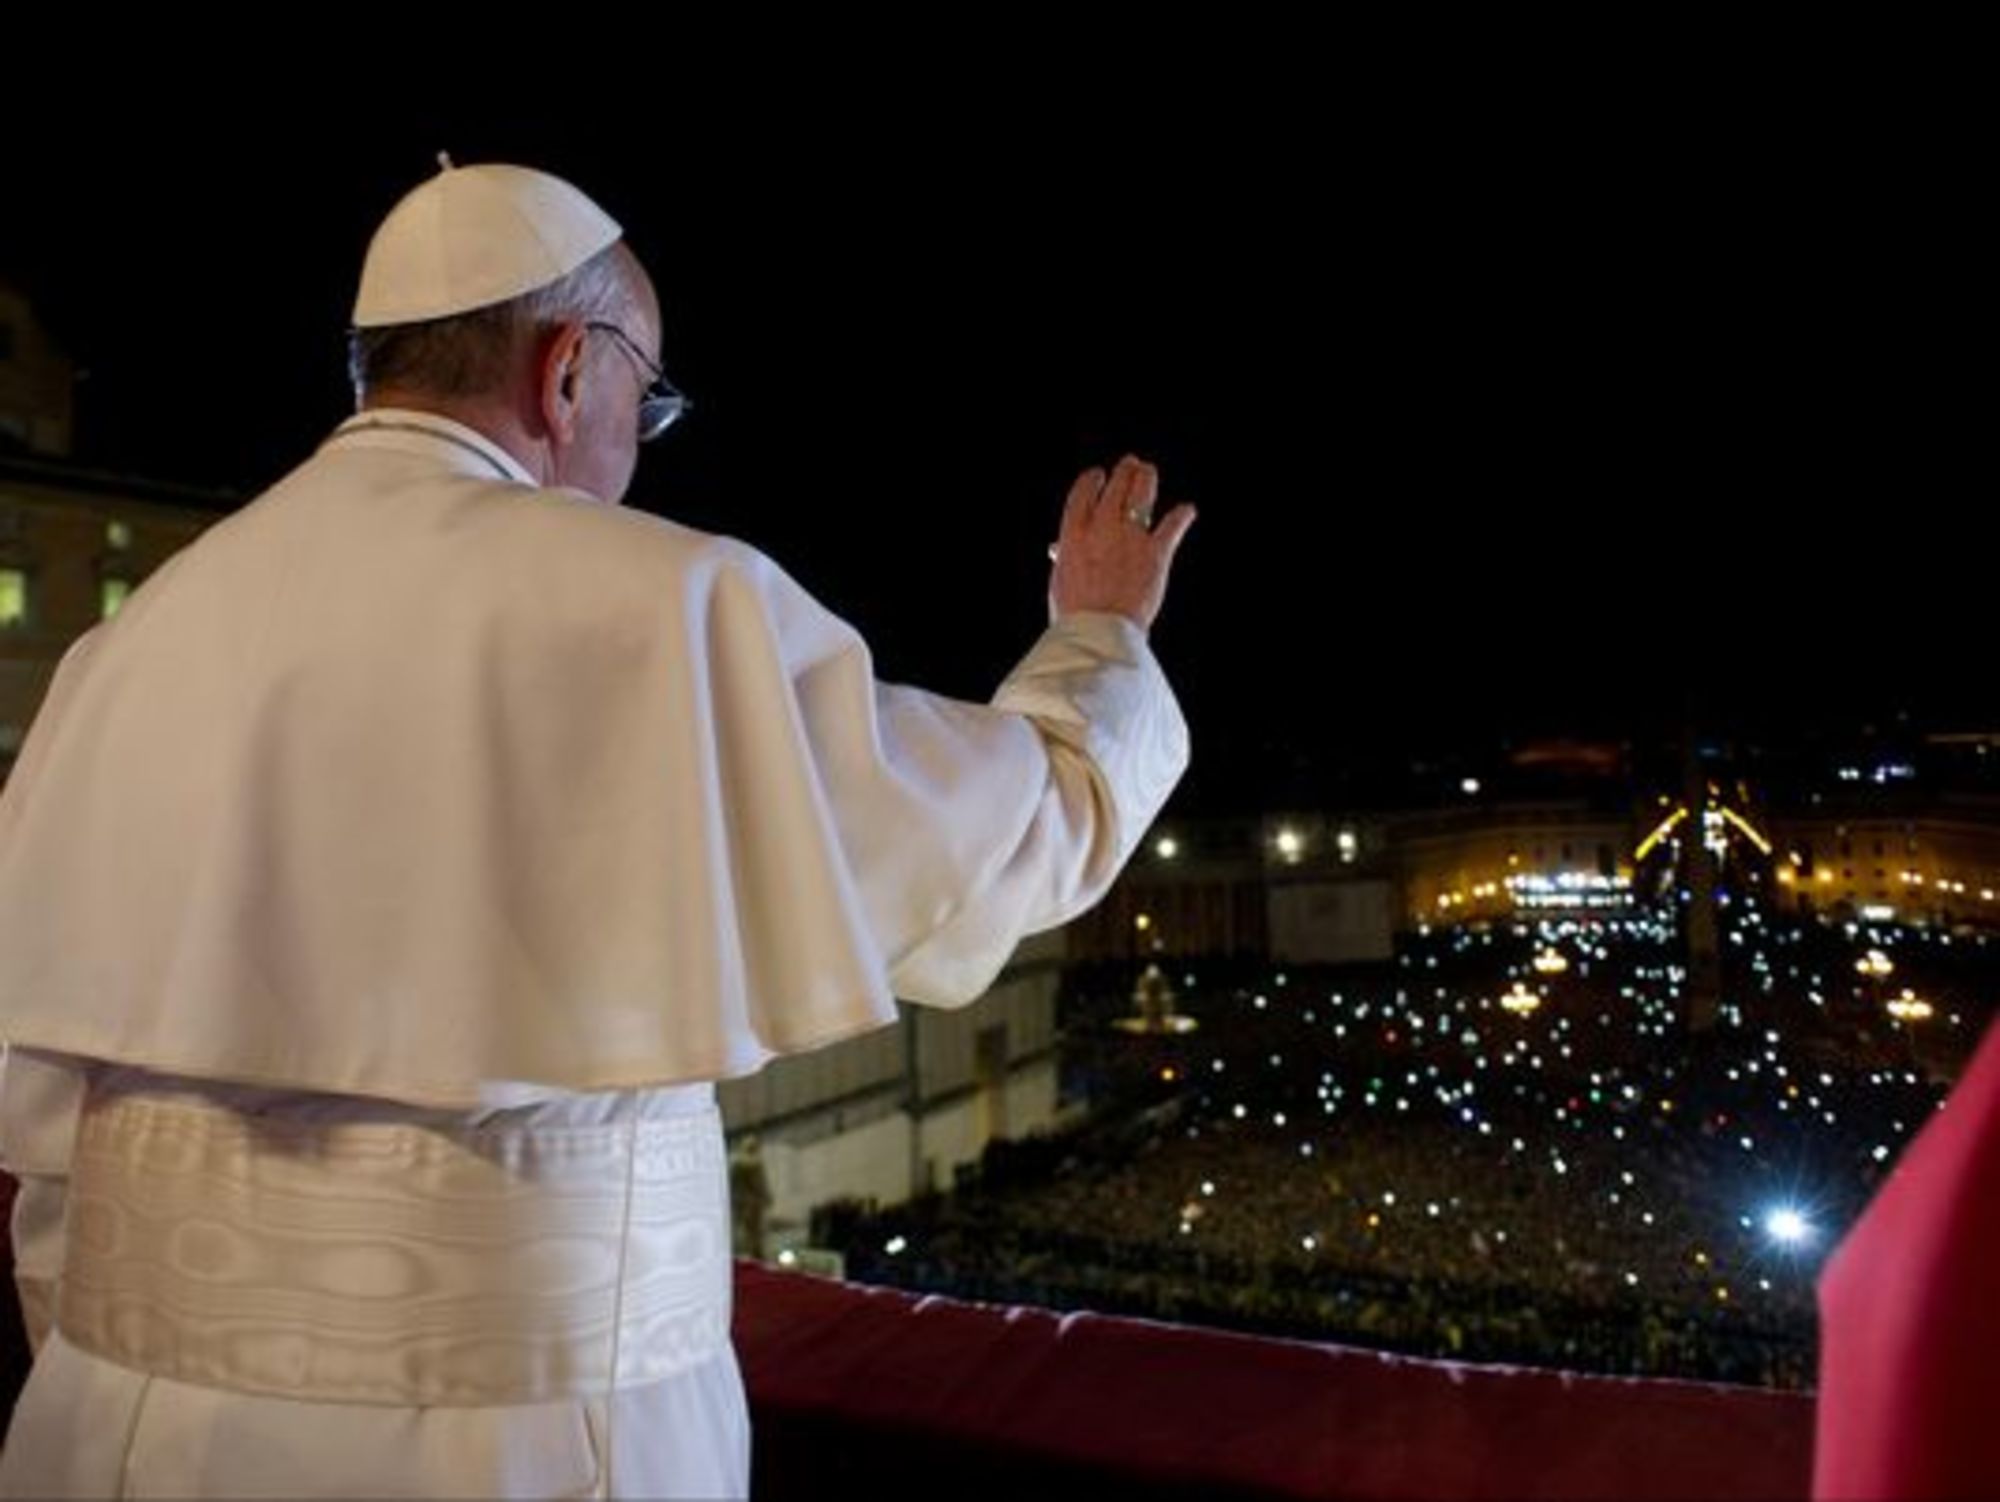 Habemus Papam +5: Pope Francis, Five Years after Becoming the First Jesuit Pope
